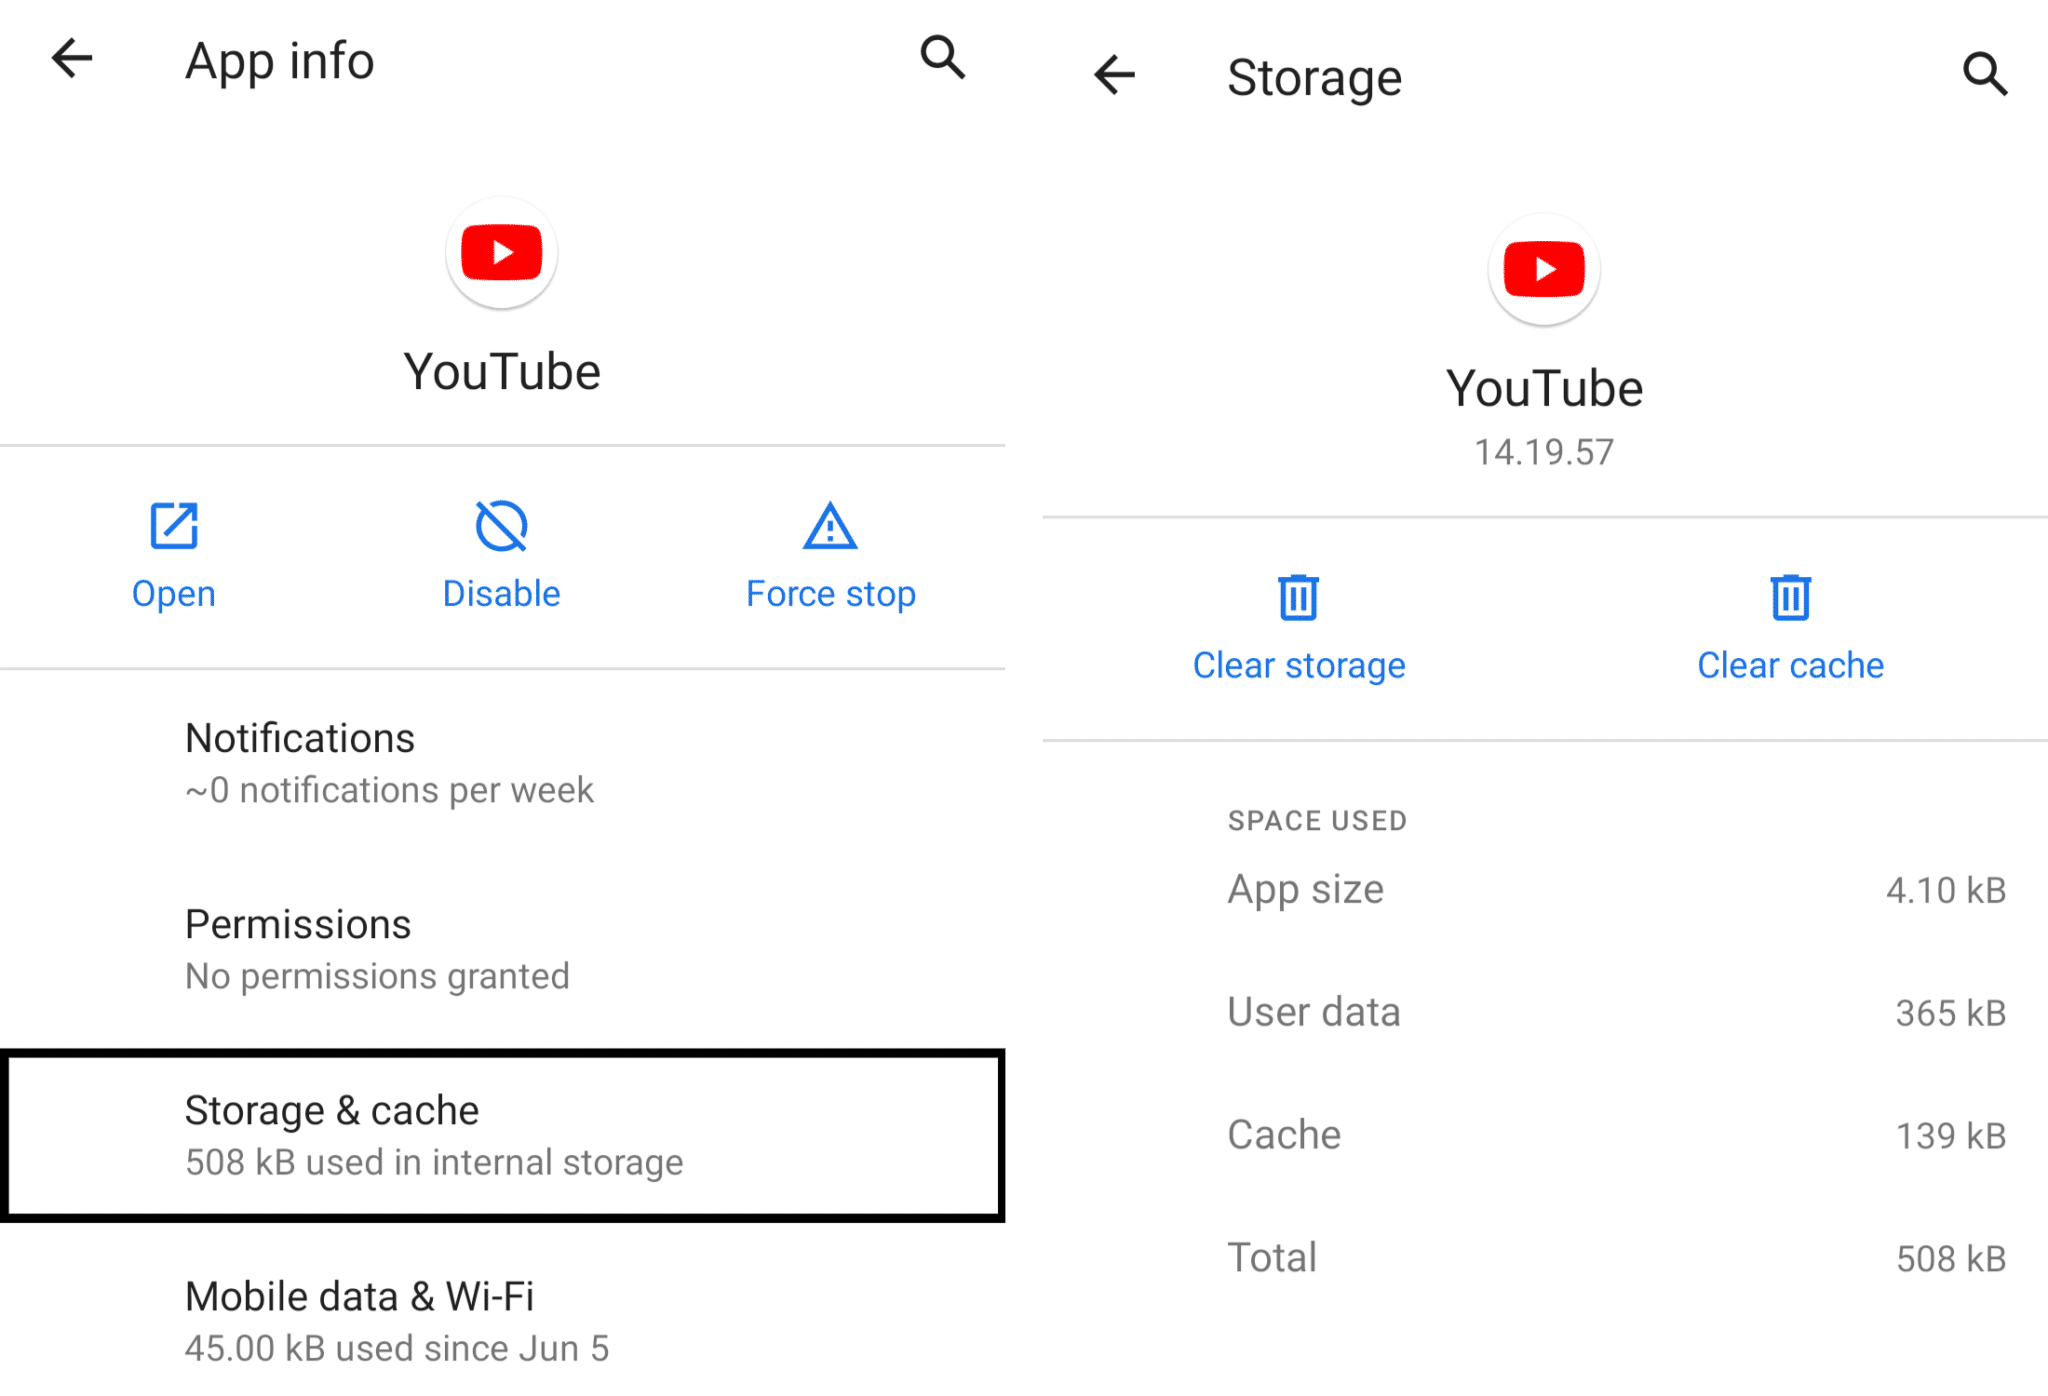 clear youtube app data on Android to fix YouTube comments not loading